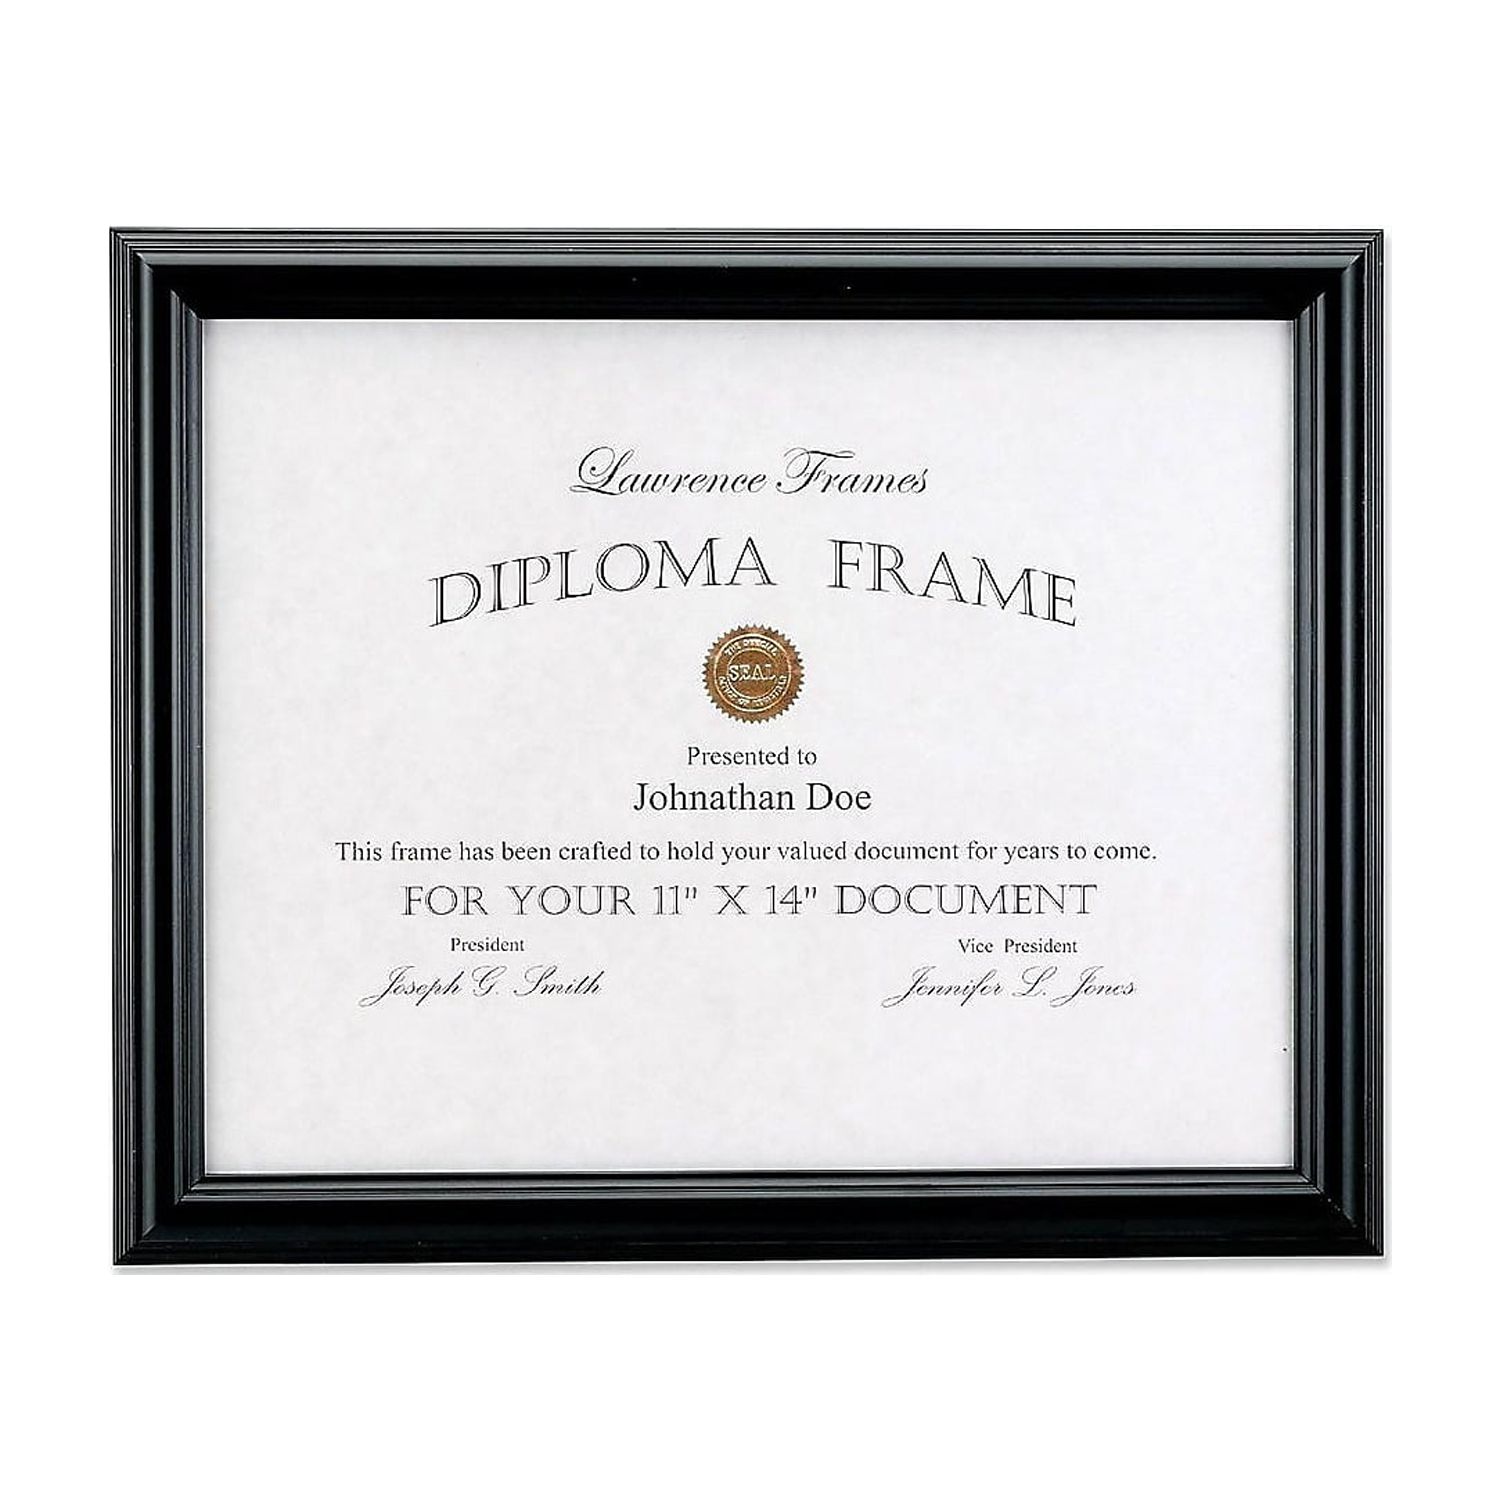 Lawrence Frames 11x14 Black Document Picture Frame - image 1 of 5